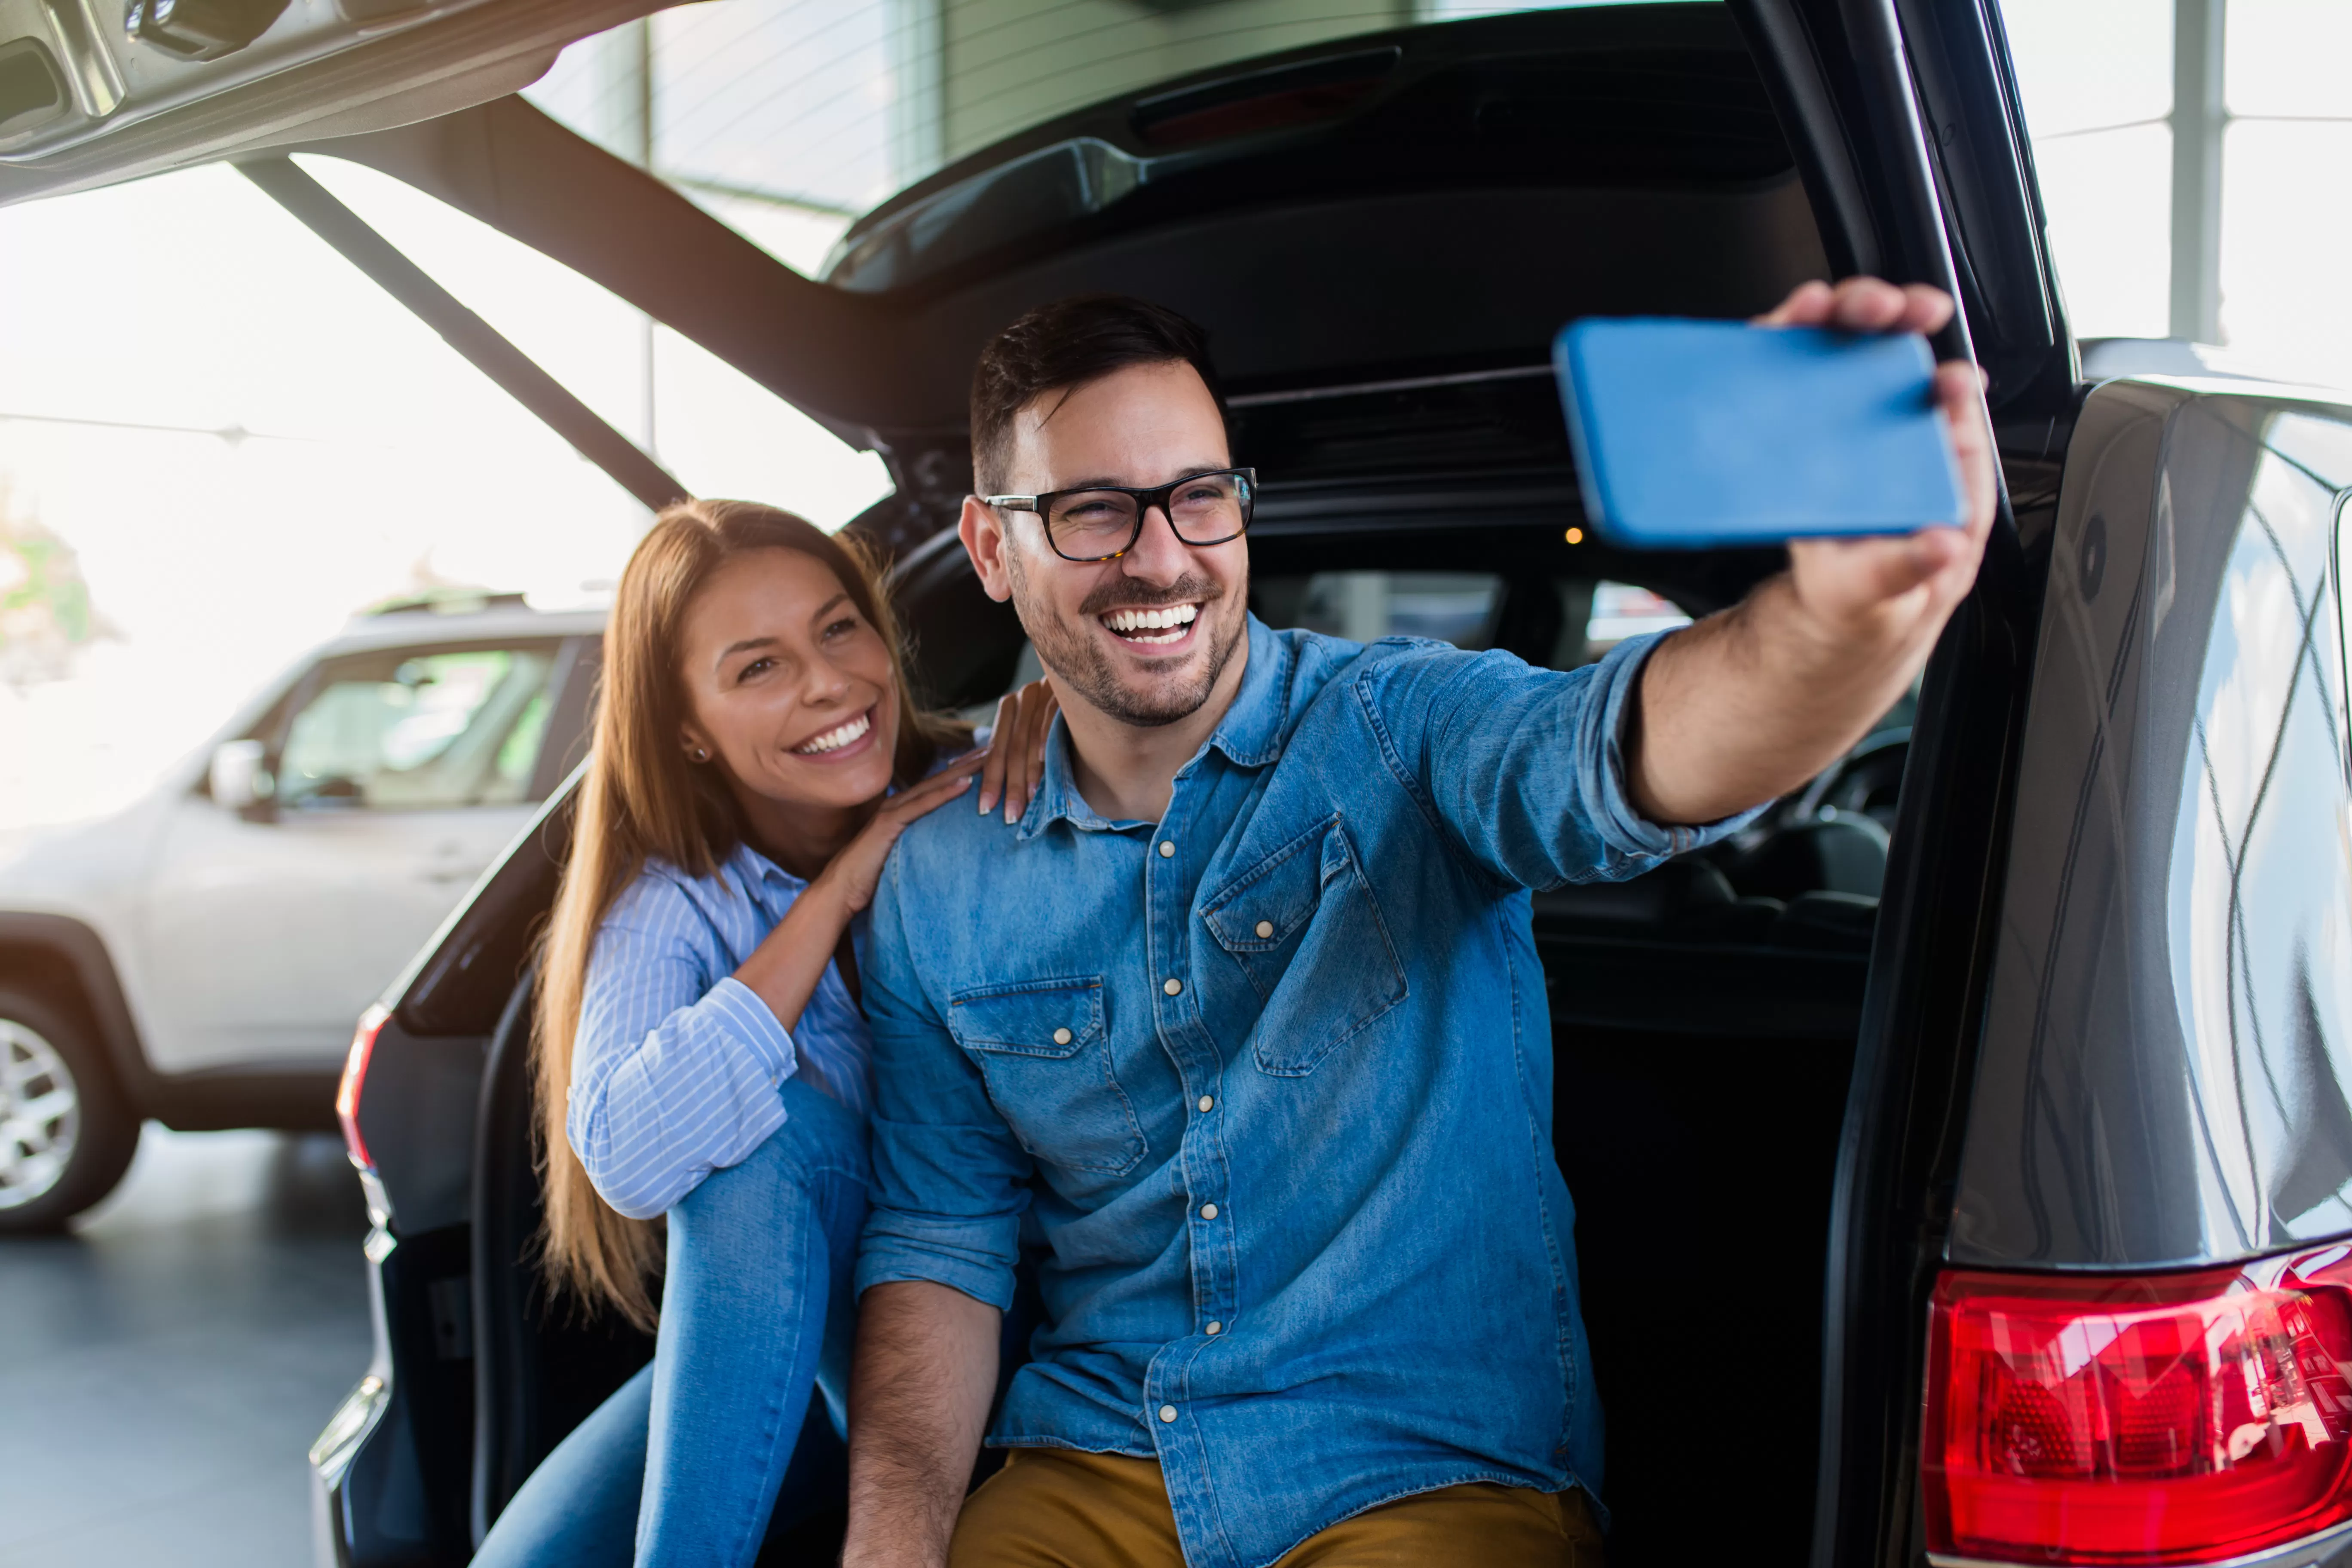 A young couple takes a selfie while checking out new cars after learning about auto loan terms.